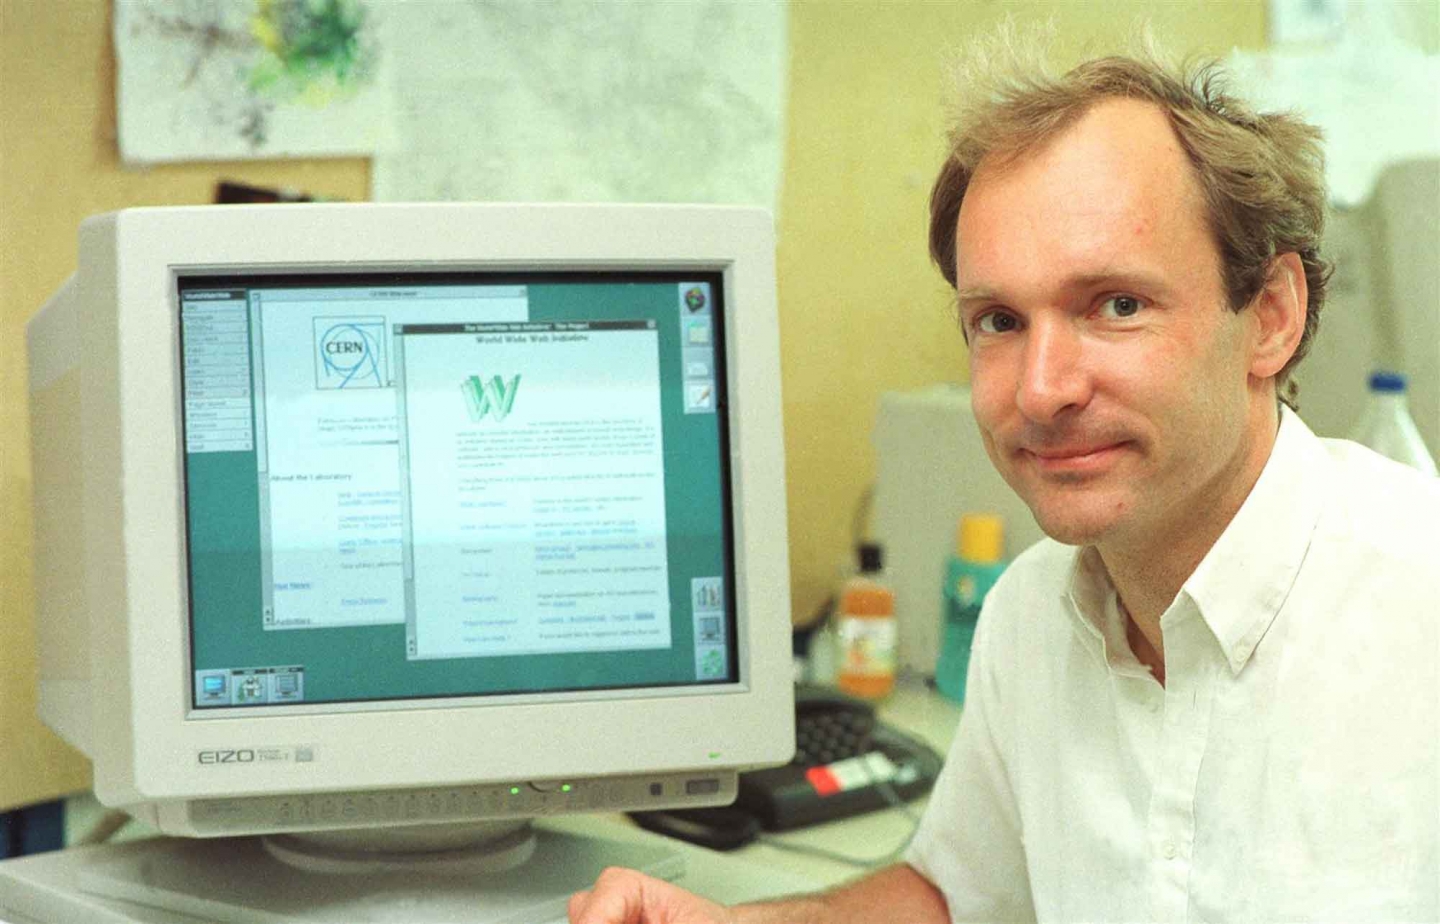 Berners-Lee in 1994 with his web browser.